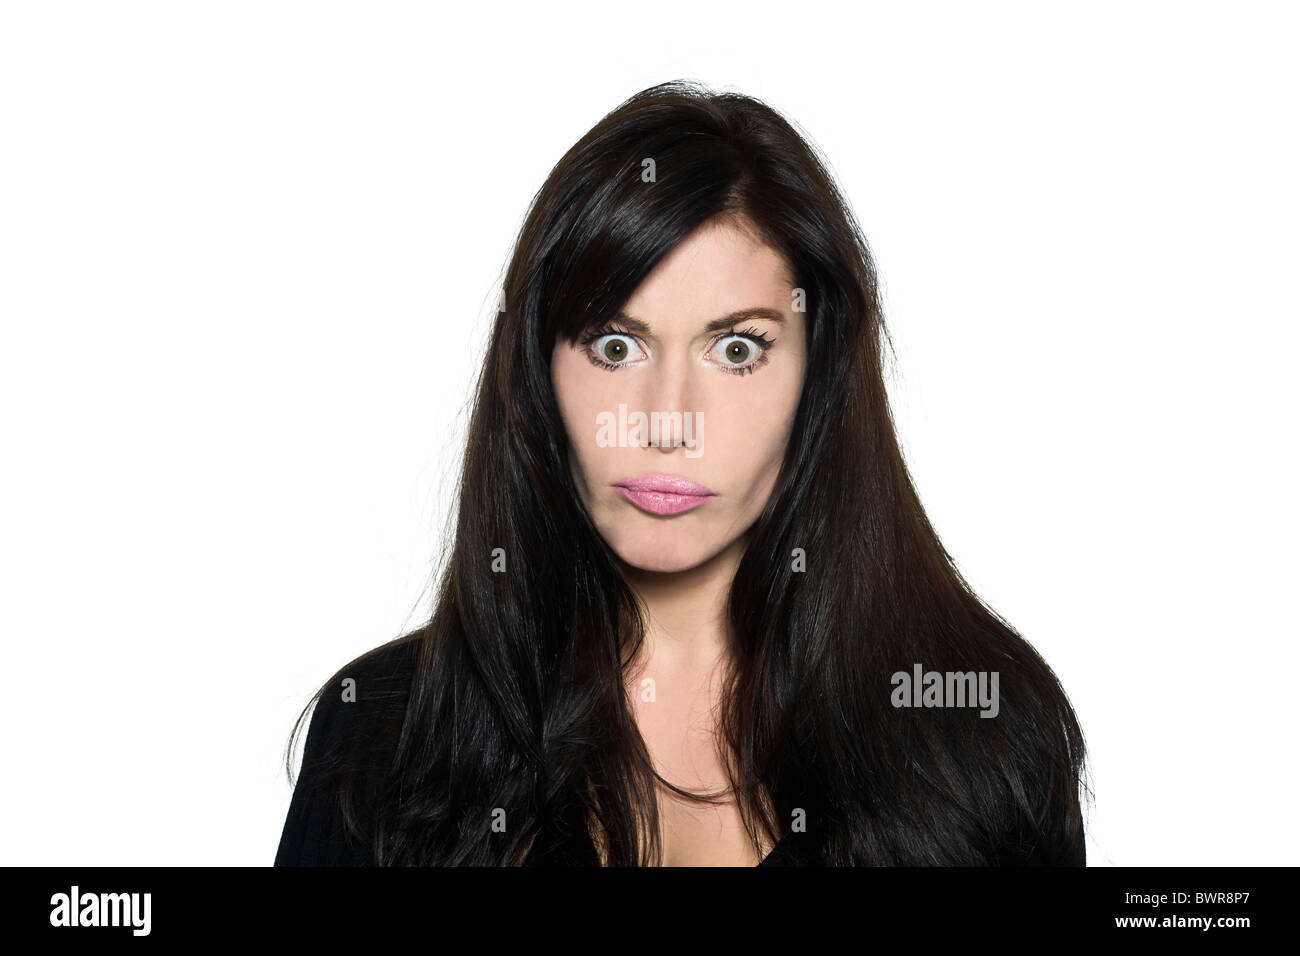 studio shot portrait on isolated white background of a Beautiful Woman confusion silly stupid angry Stock Photo